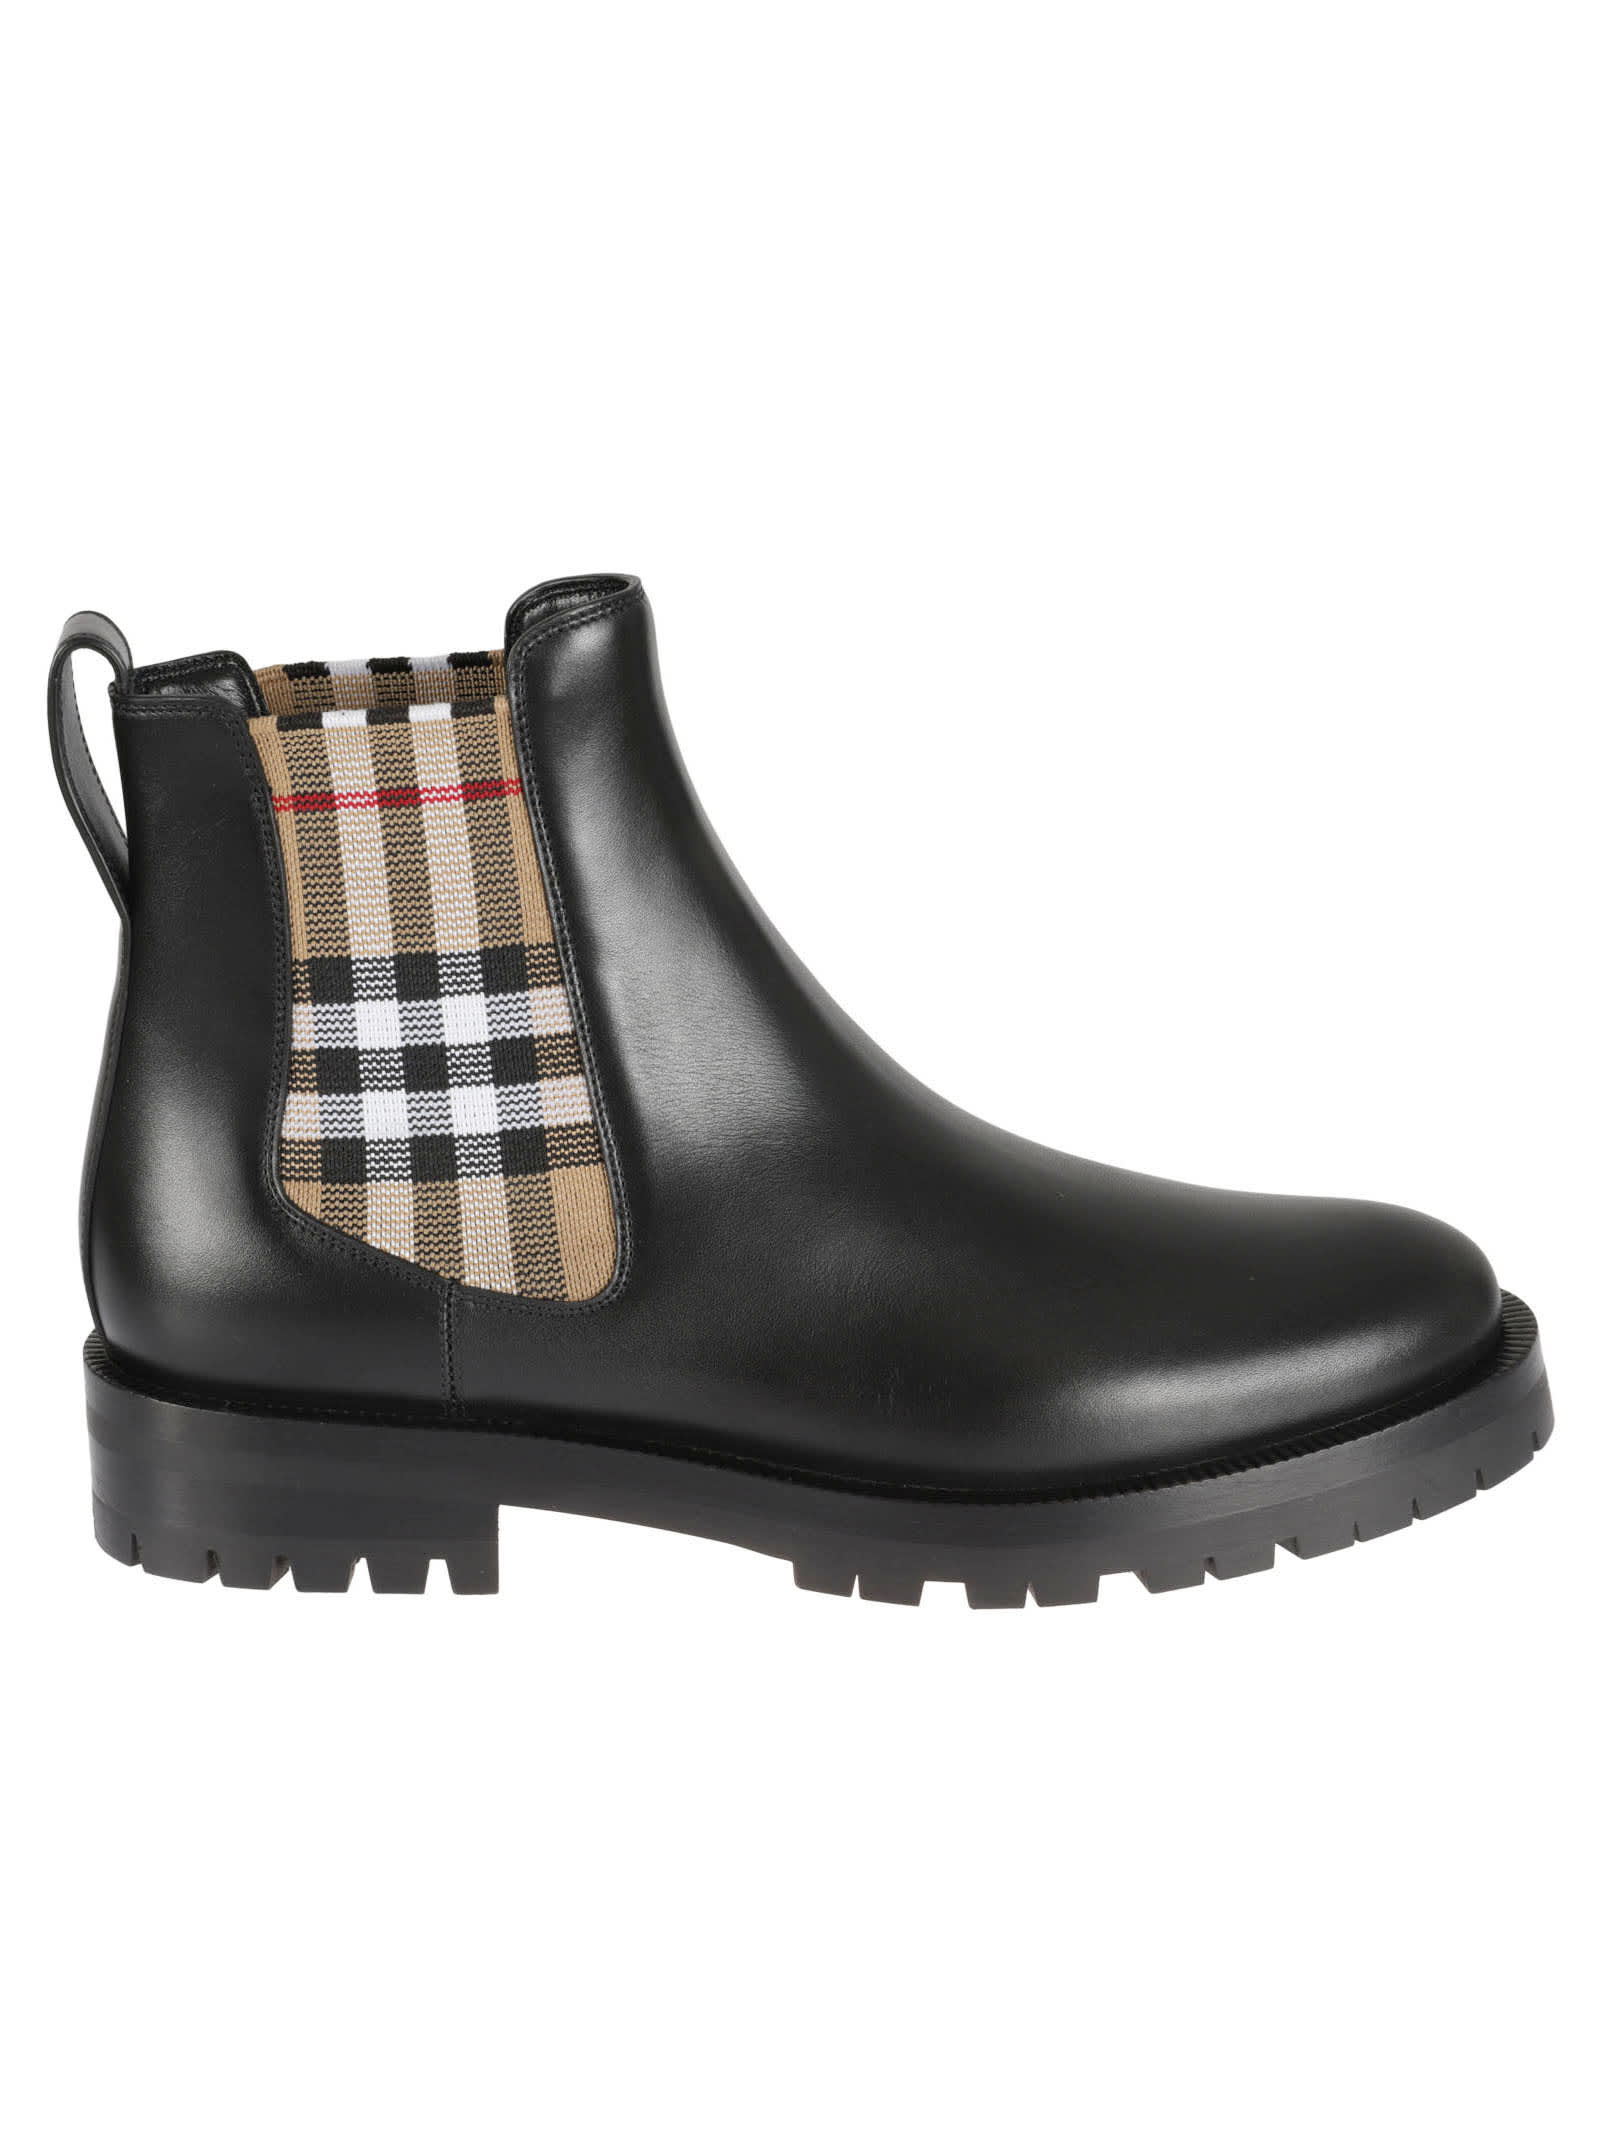 BURBERRY ALLOSTOCK ANKLE BOOTS